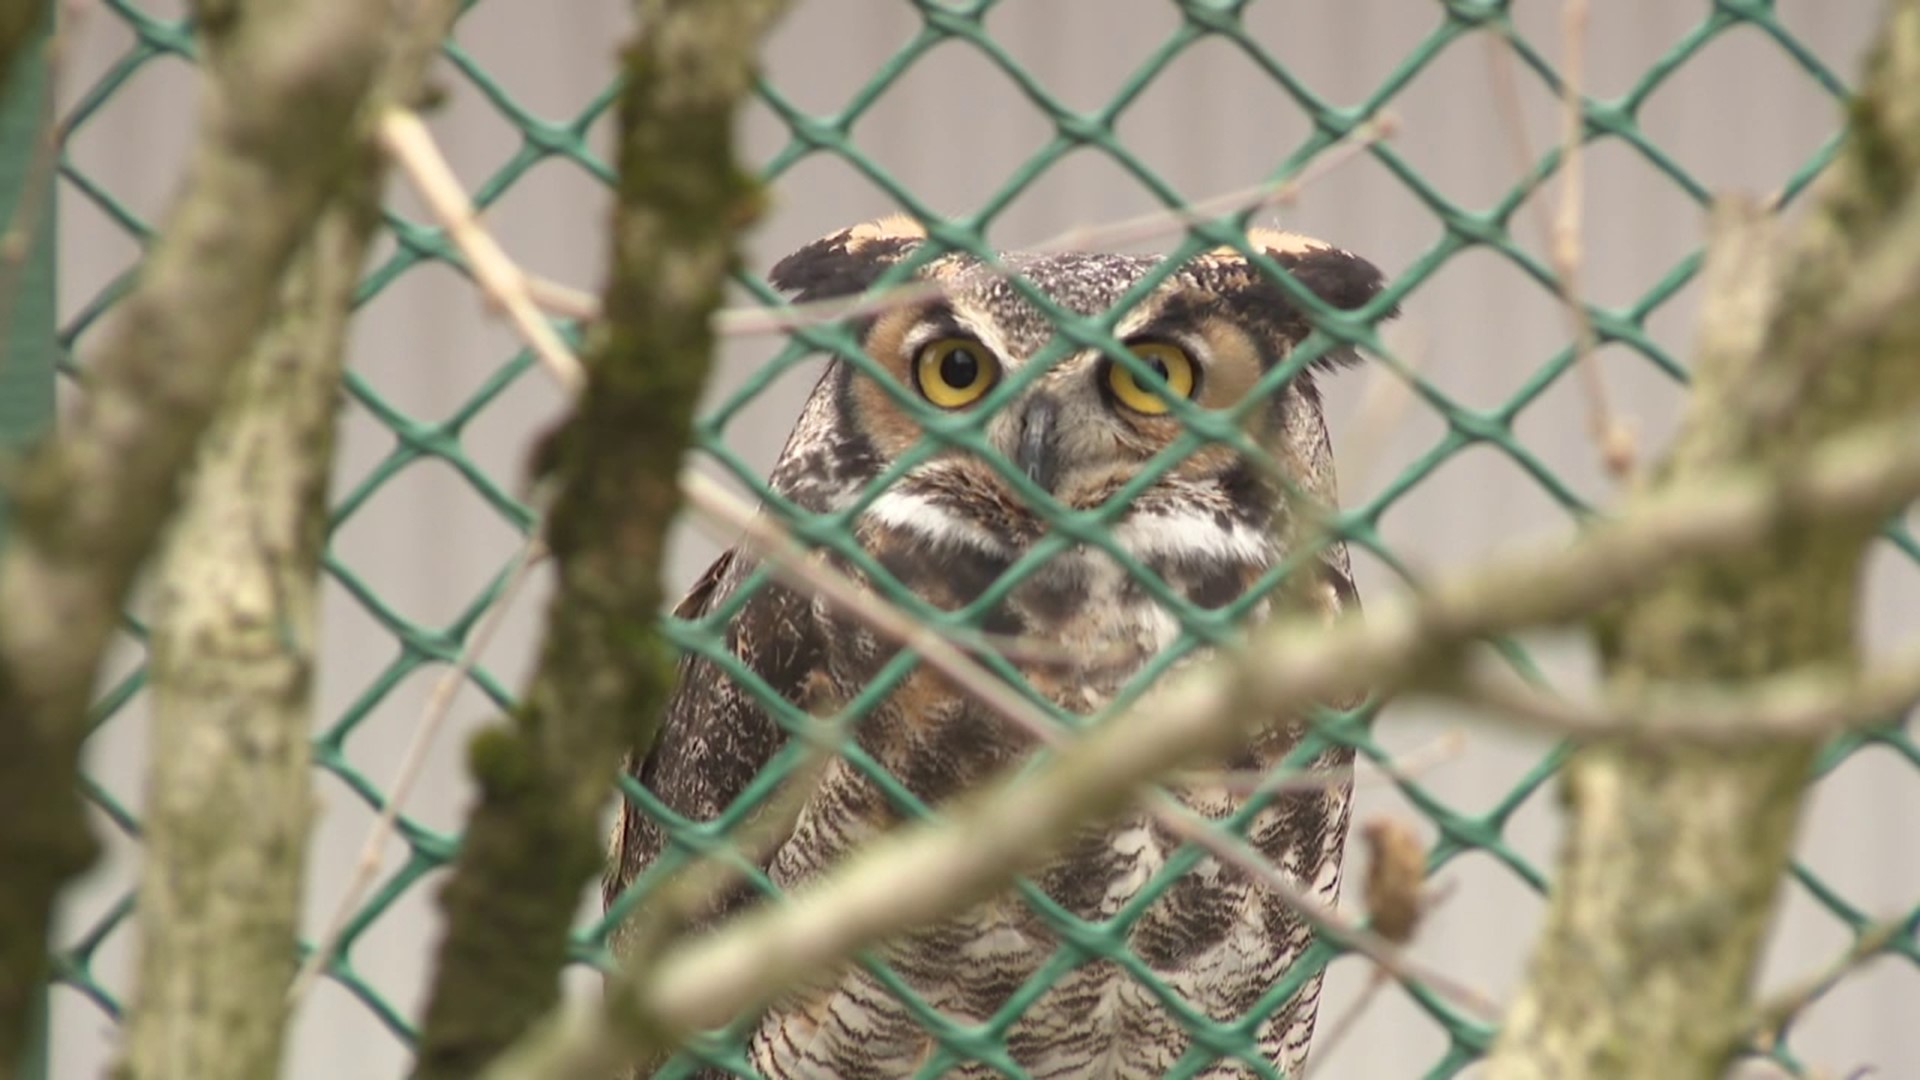 Below-freezing temperatures over the weekend knocked out power for three days at Pocono Wildlife Rehabilitation and Education Center.